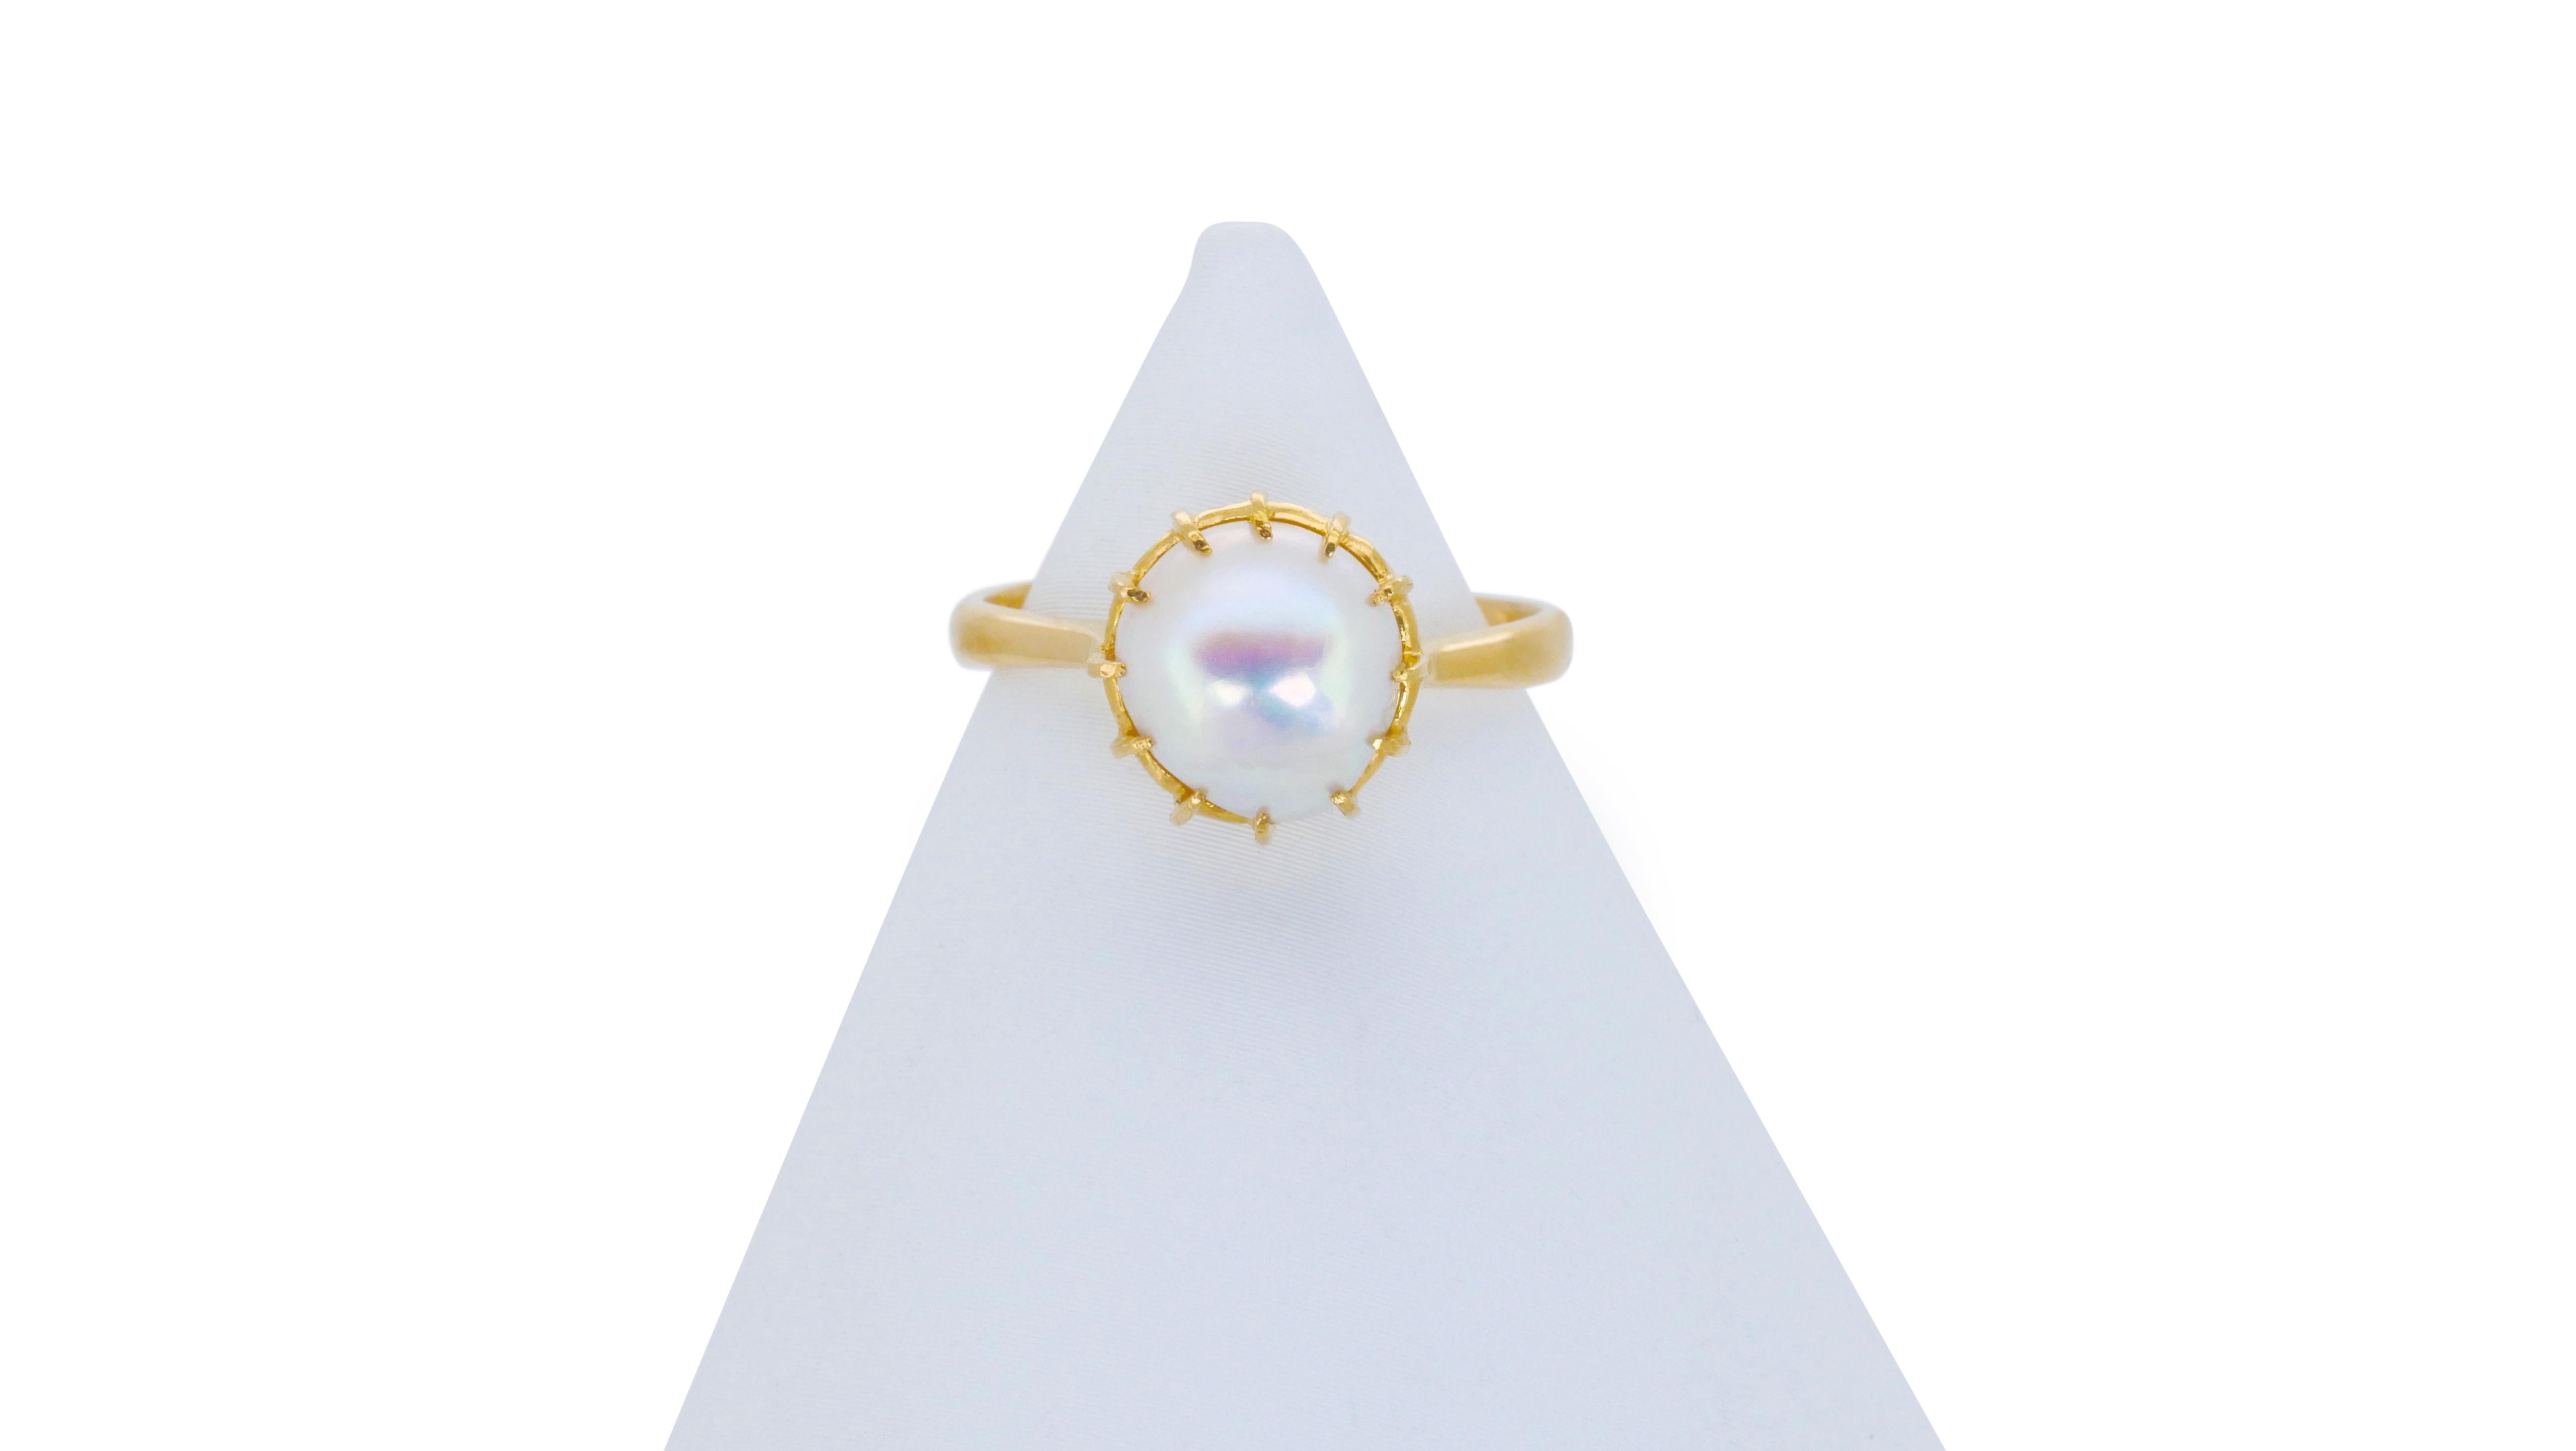 A beautiful ring with a dazzling Pearl as the center stone. The jewelry is made of 20k yellow Gold with a high quality polish. It comes with  NGI certificate and a fancy jewelry box.

Product Details: 
Metal: 20k Yellow Gold 
Main stone: 1 pcs tcw